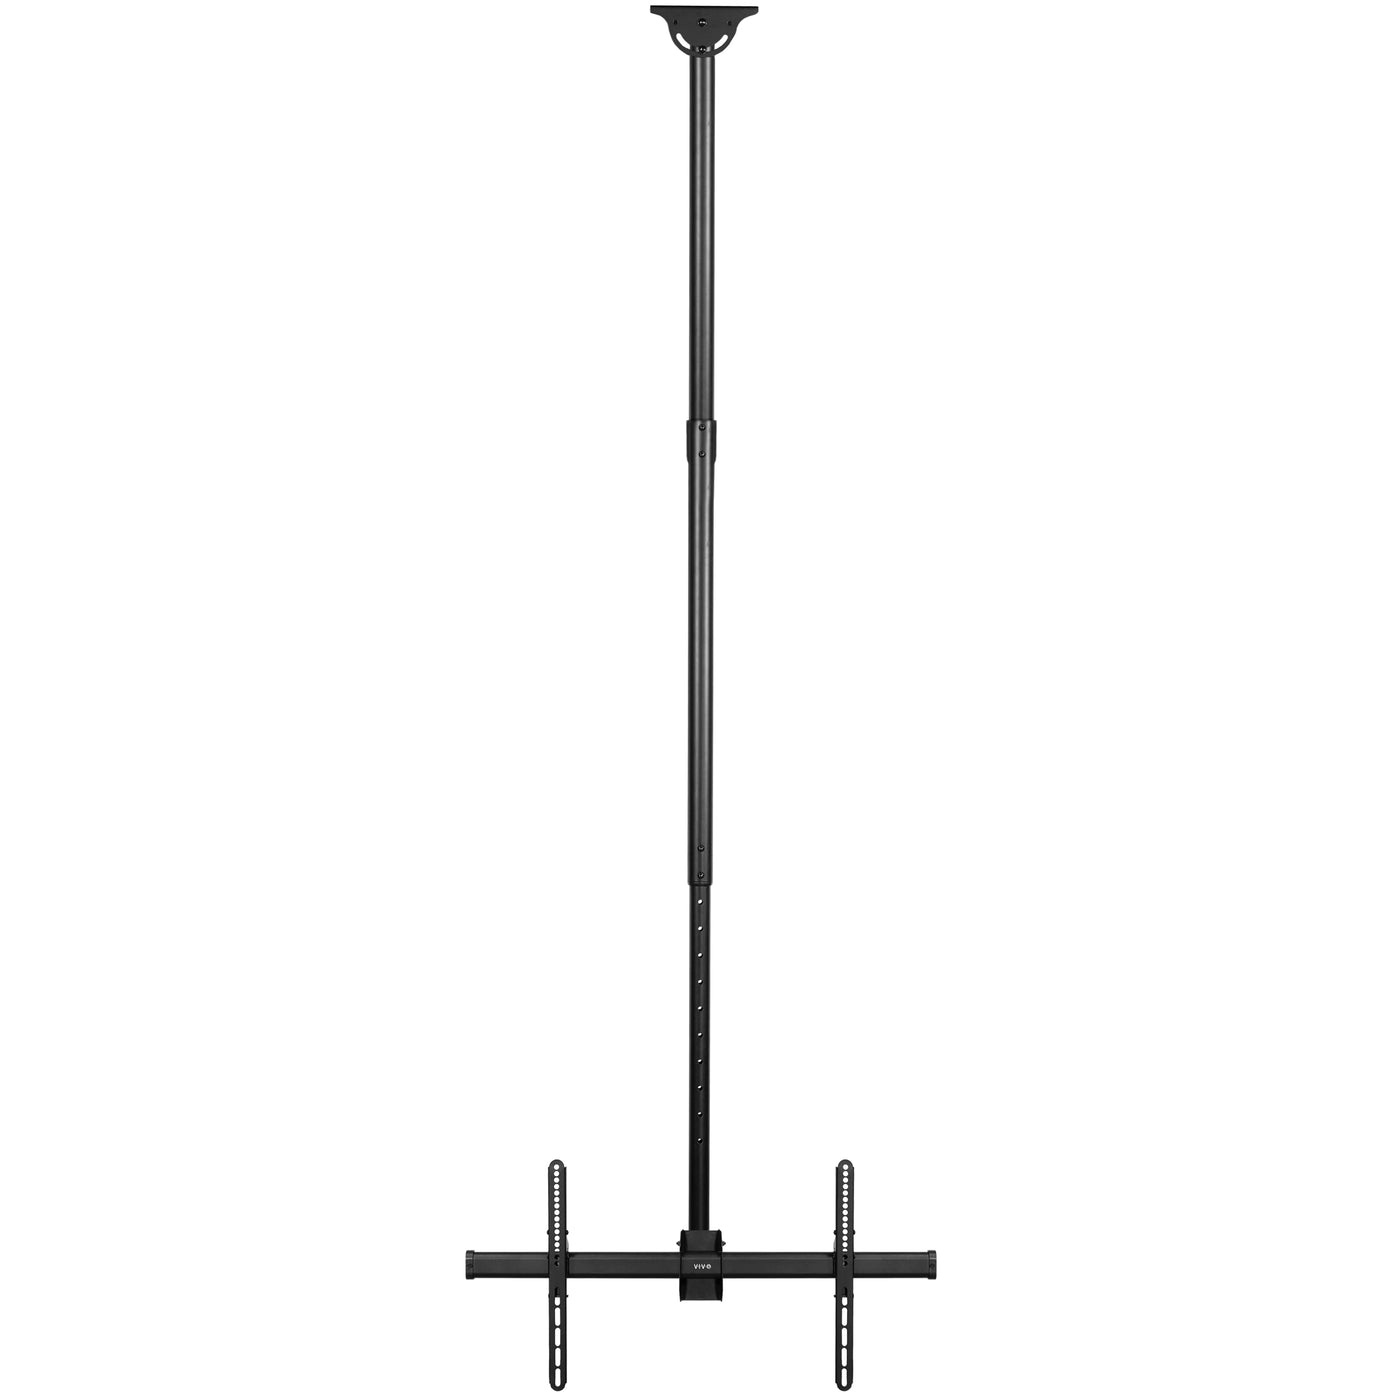 Large heavy-duty TV ceiling mount with height adjustable 10-foot extension pole with swivel and tilt and built-in cable management. Compatible with flat or sloped ceilings and wood, brick, and concrete mounting surfaces.